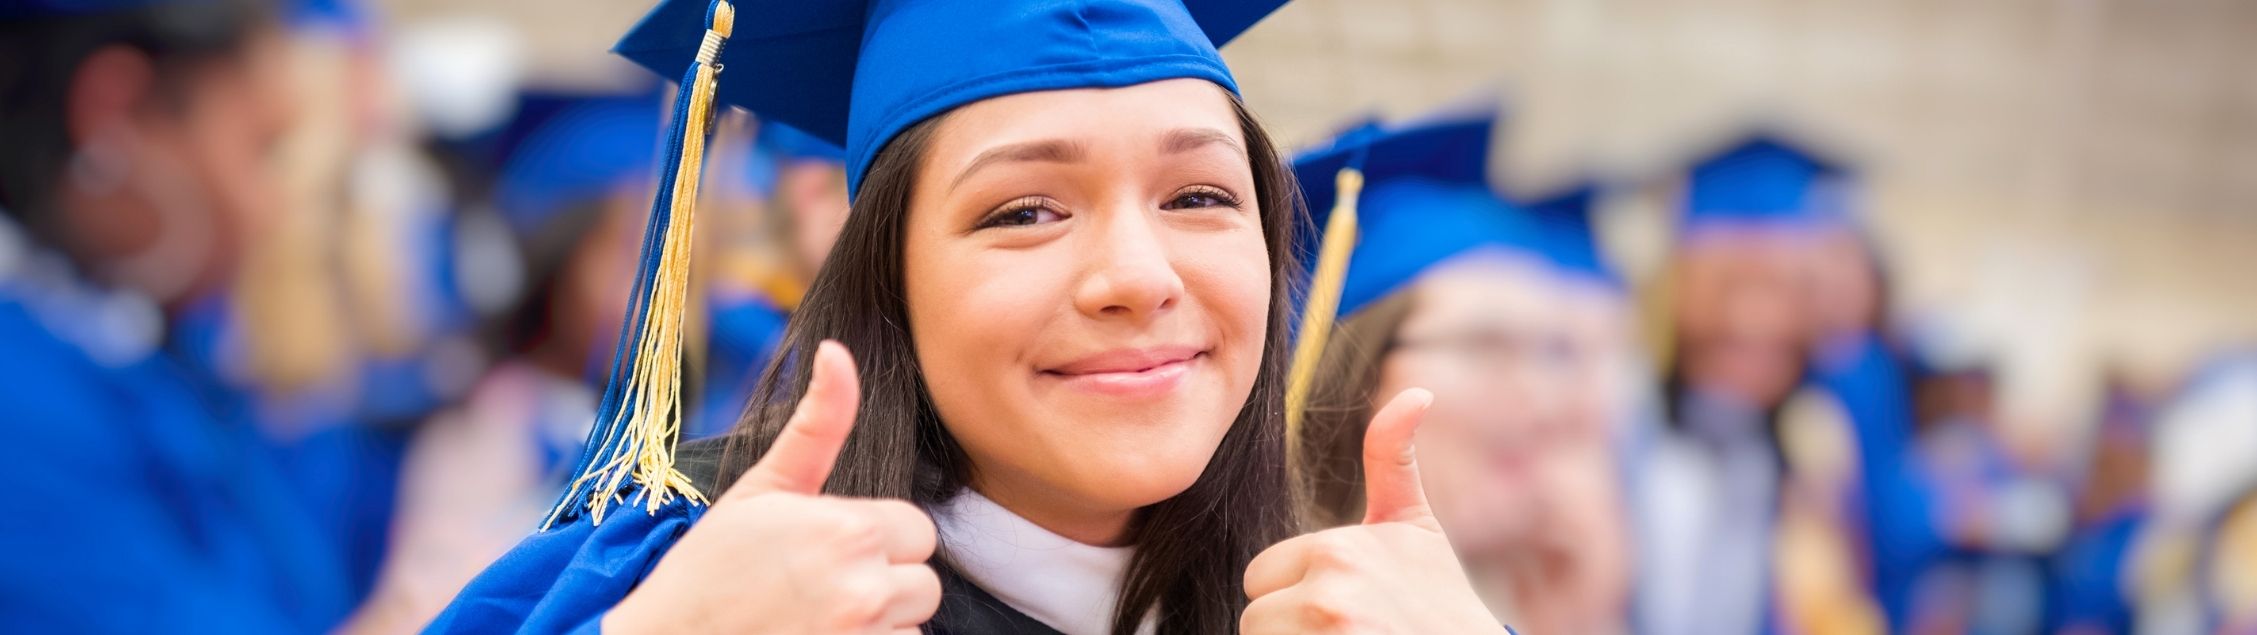 Girl in graduation gown giving two thumbs up